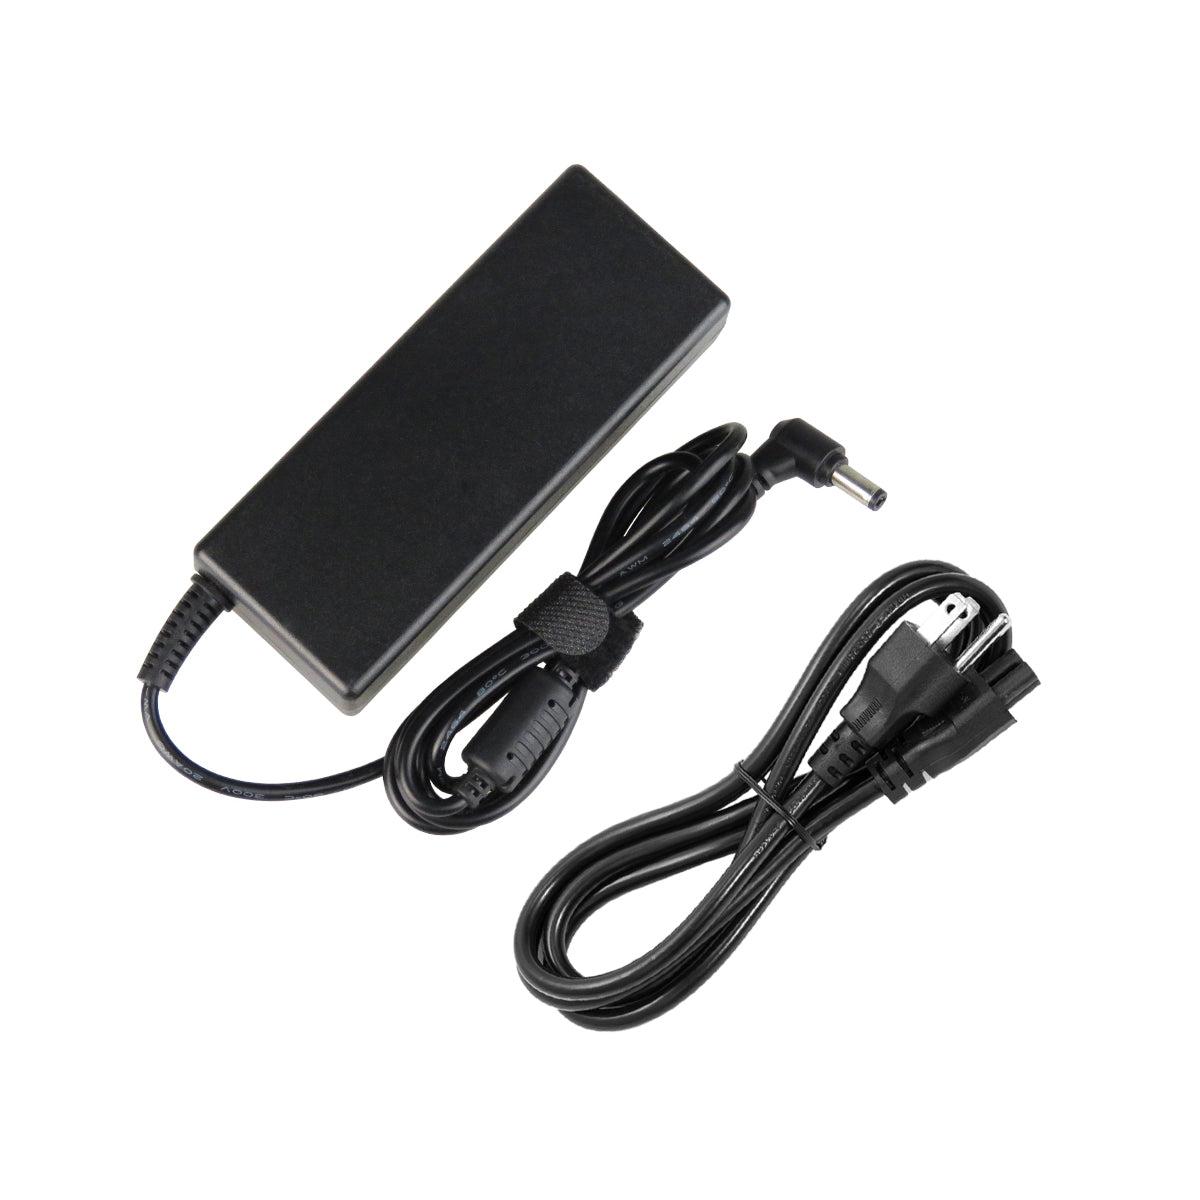 AC Adapter Charger for ASUS X52J Notebook.